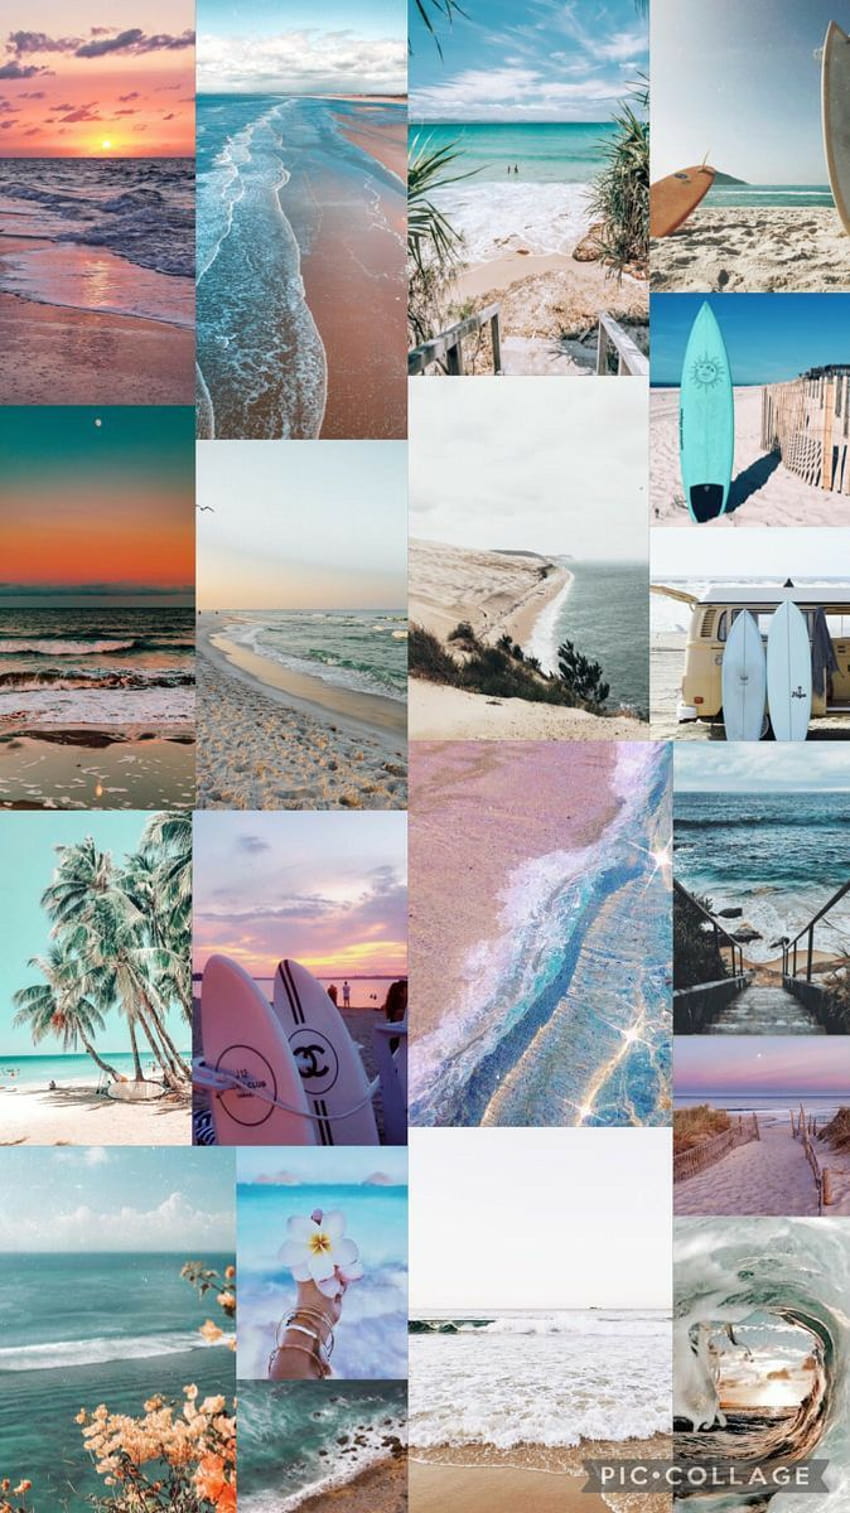 Beach Desktop Wallpaper Images  Free Photos PNG Stickers Wallpapers   Backgrounds  rawpixel